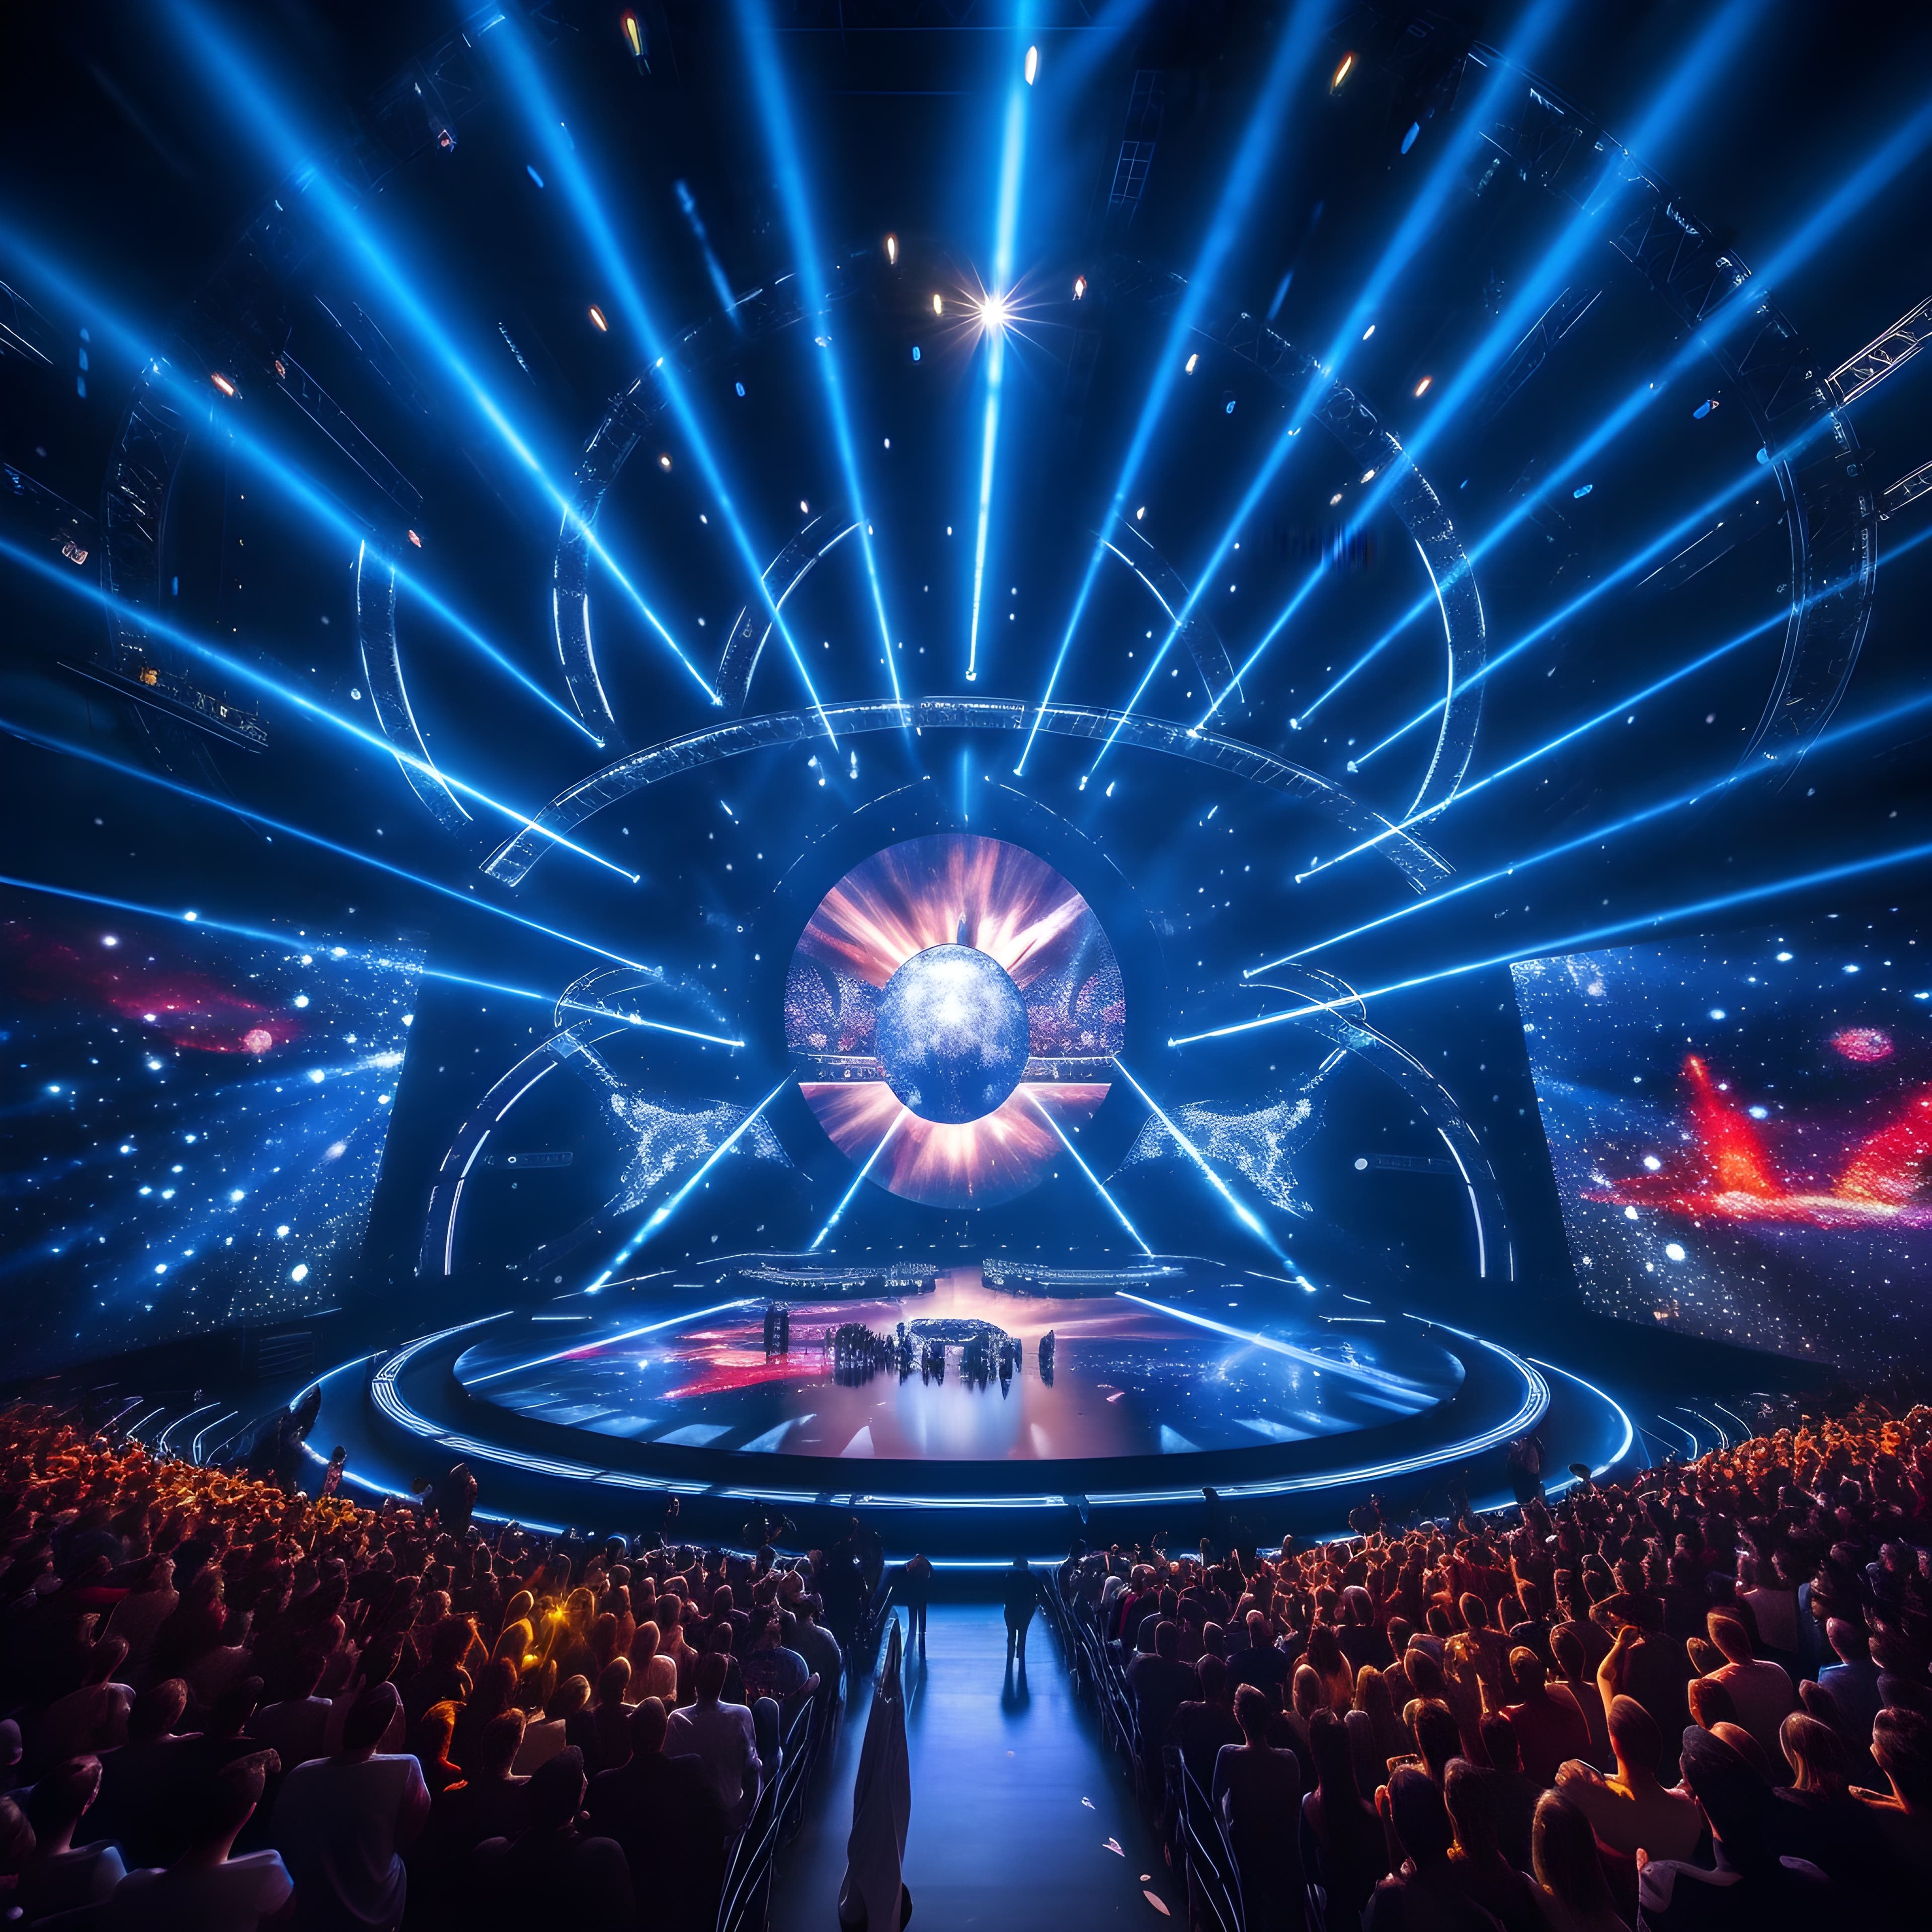 Eurovision Song Contest stage illuminated by dazzling lights